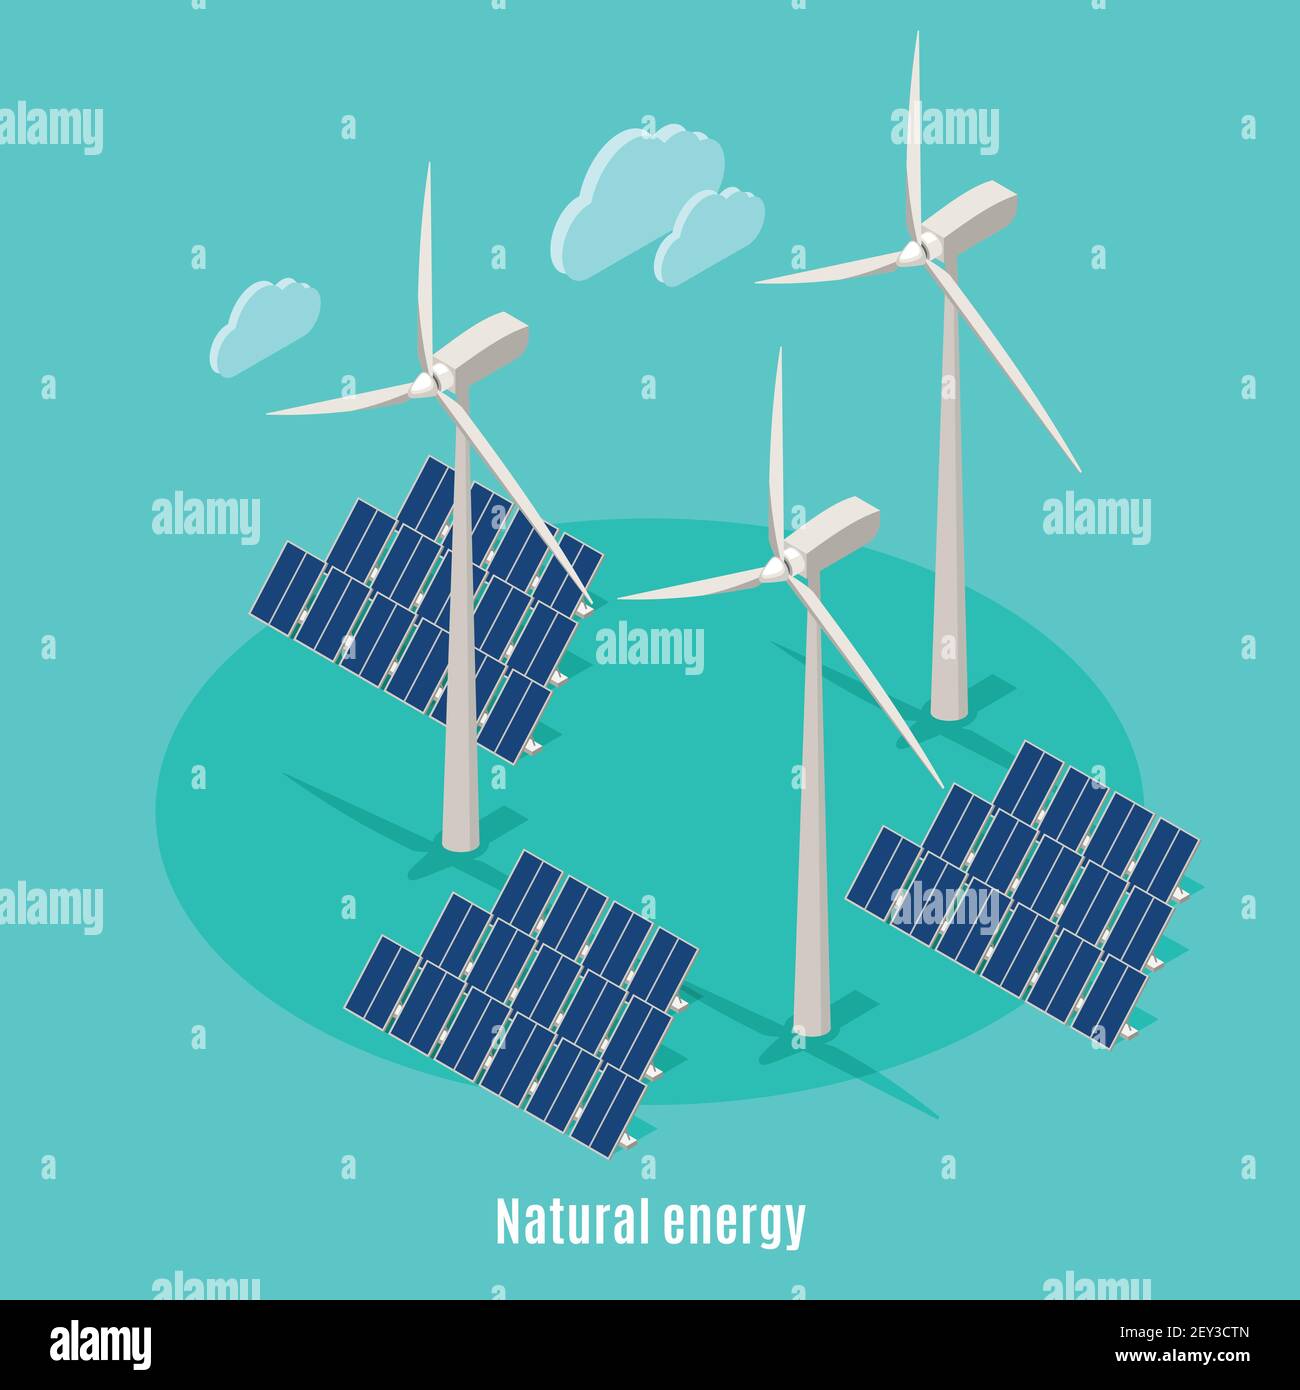 Smart urban ecology isometric background with text and images of windmills turbine towers and solar batteries vector illustration Stock Vector